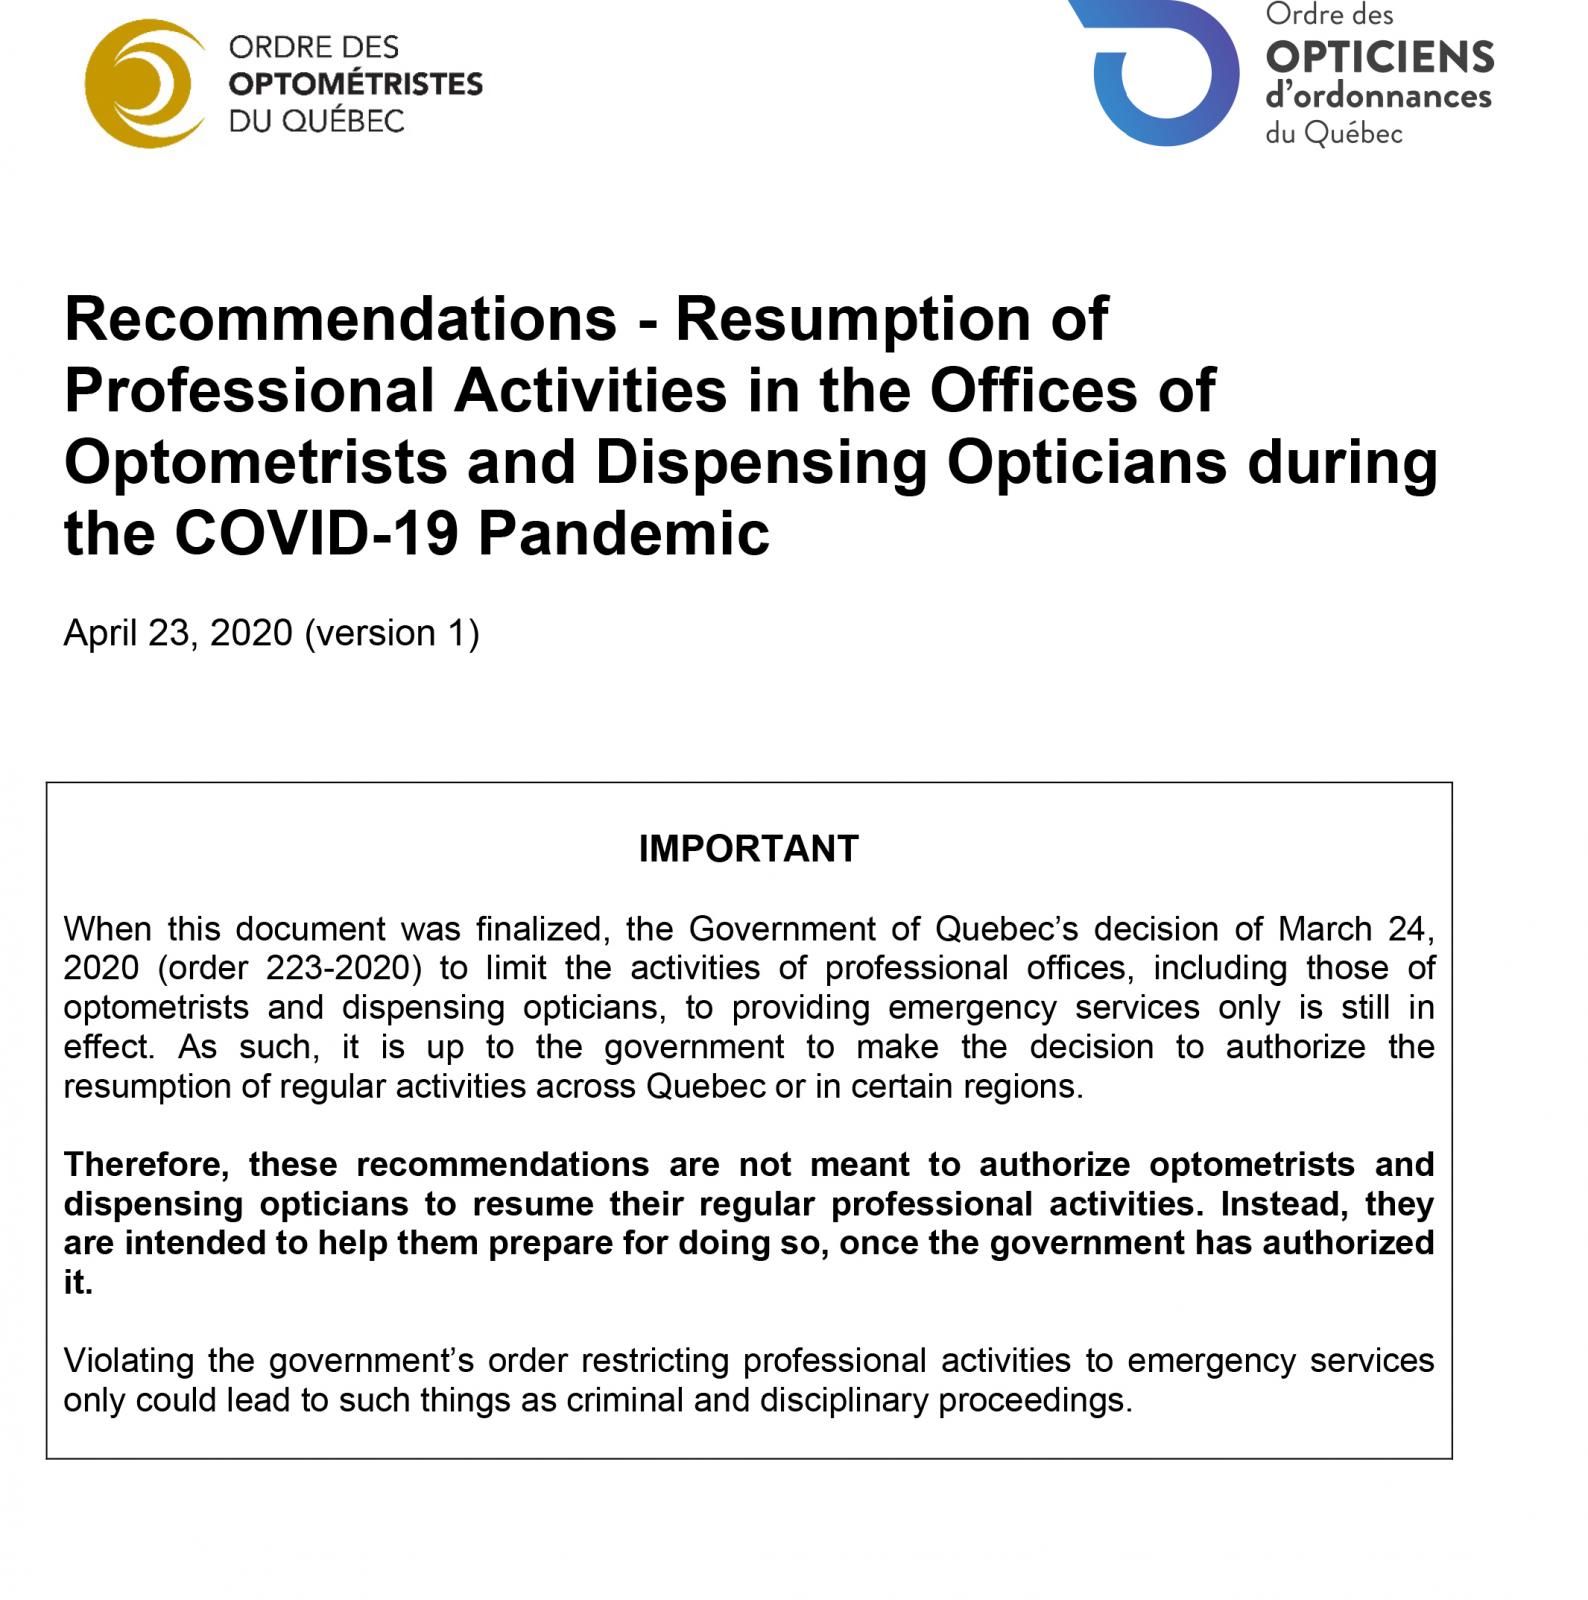 Recommendations - Resumption of Professional Activities in the Offices of Optometrists and Dispensing Opticians during the COVID-19 Pandemic